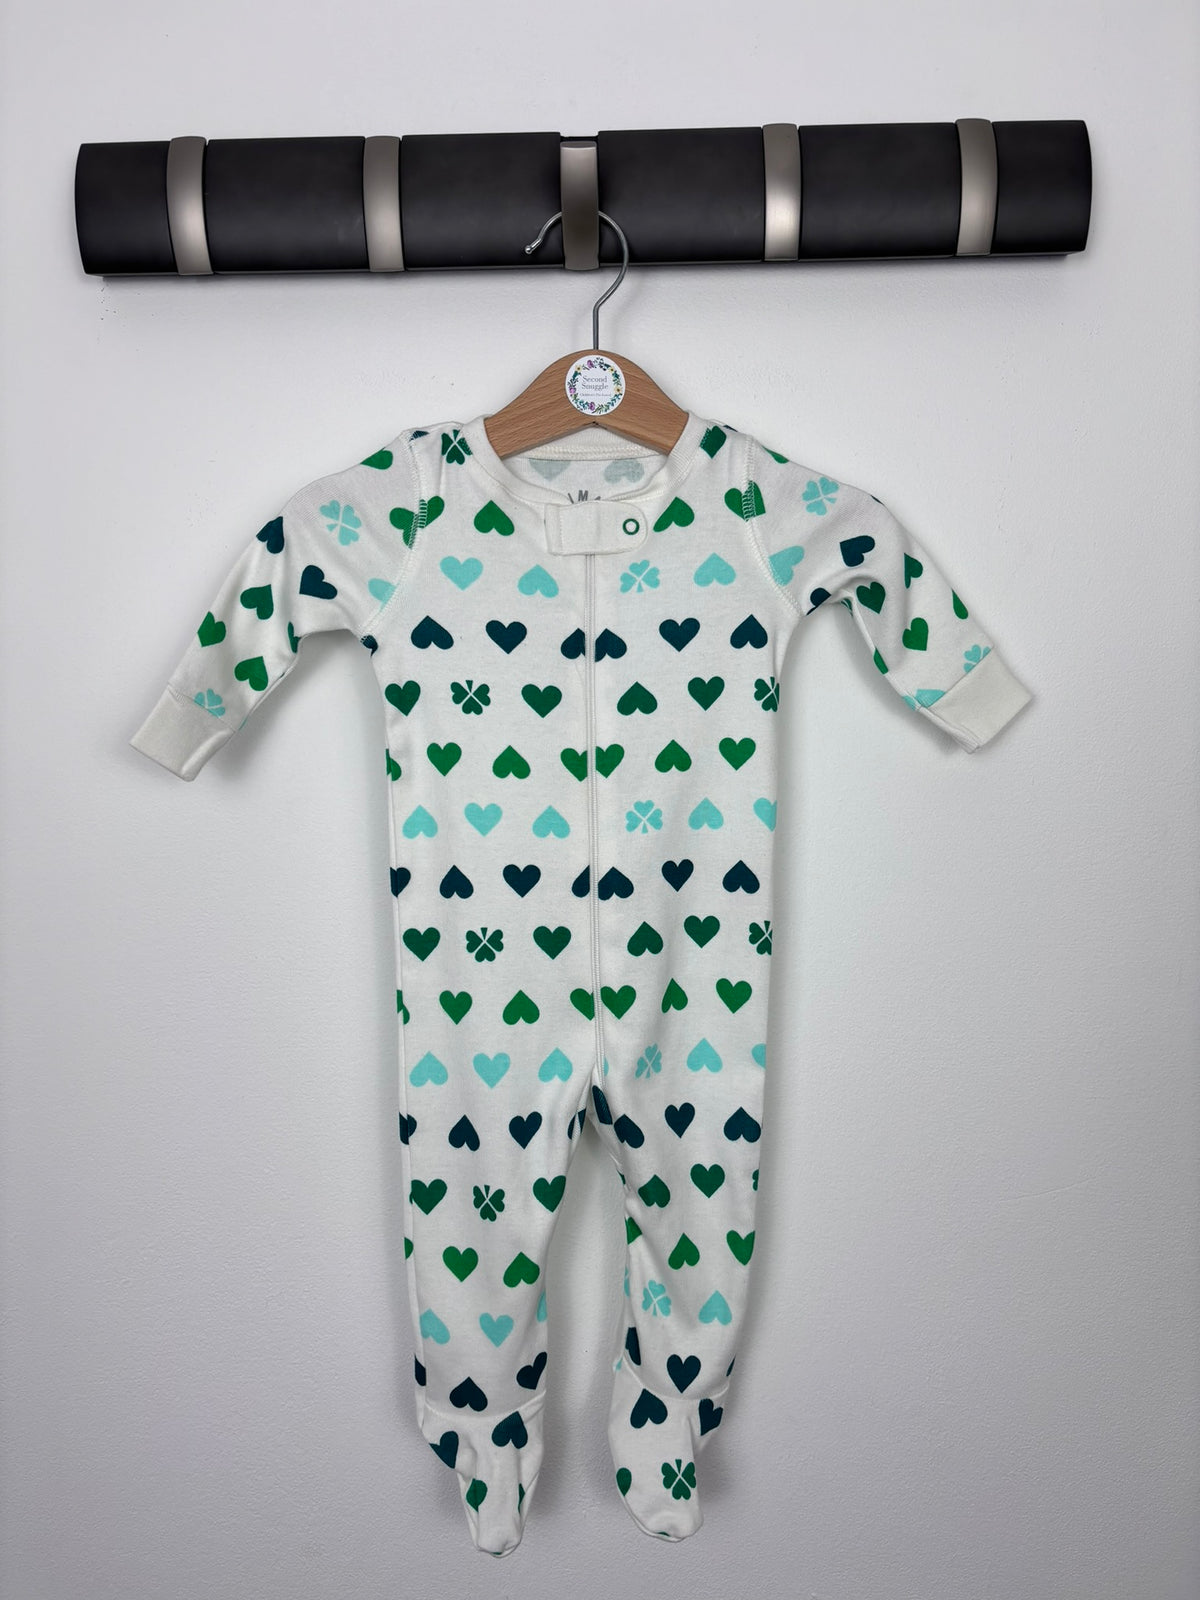 Primary Zipped Sleep Suit-Sleepsuits-Second Snuggle Preloved